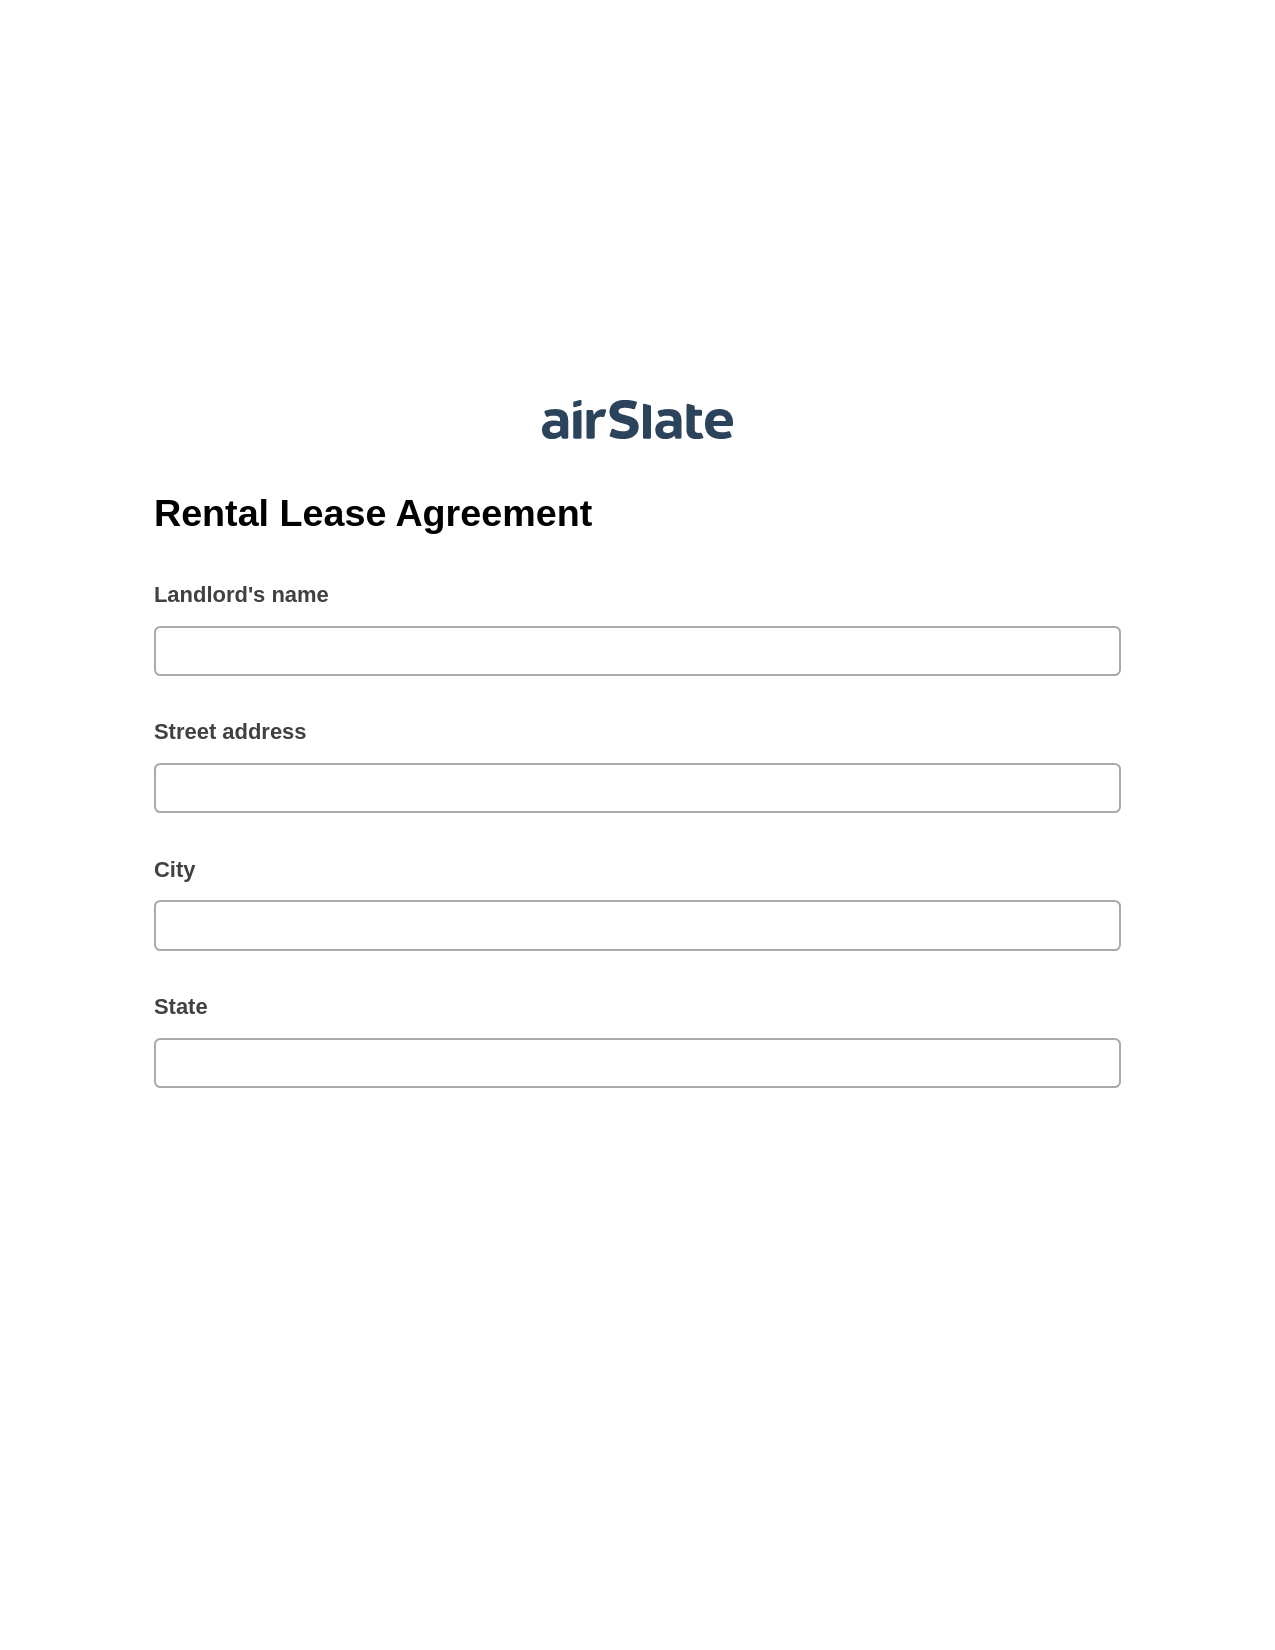 Rental Lease Agreement Pre-fill from Google Sheets Bot, Roles Reminder Bot, Google Drive Bot